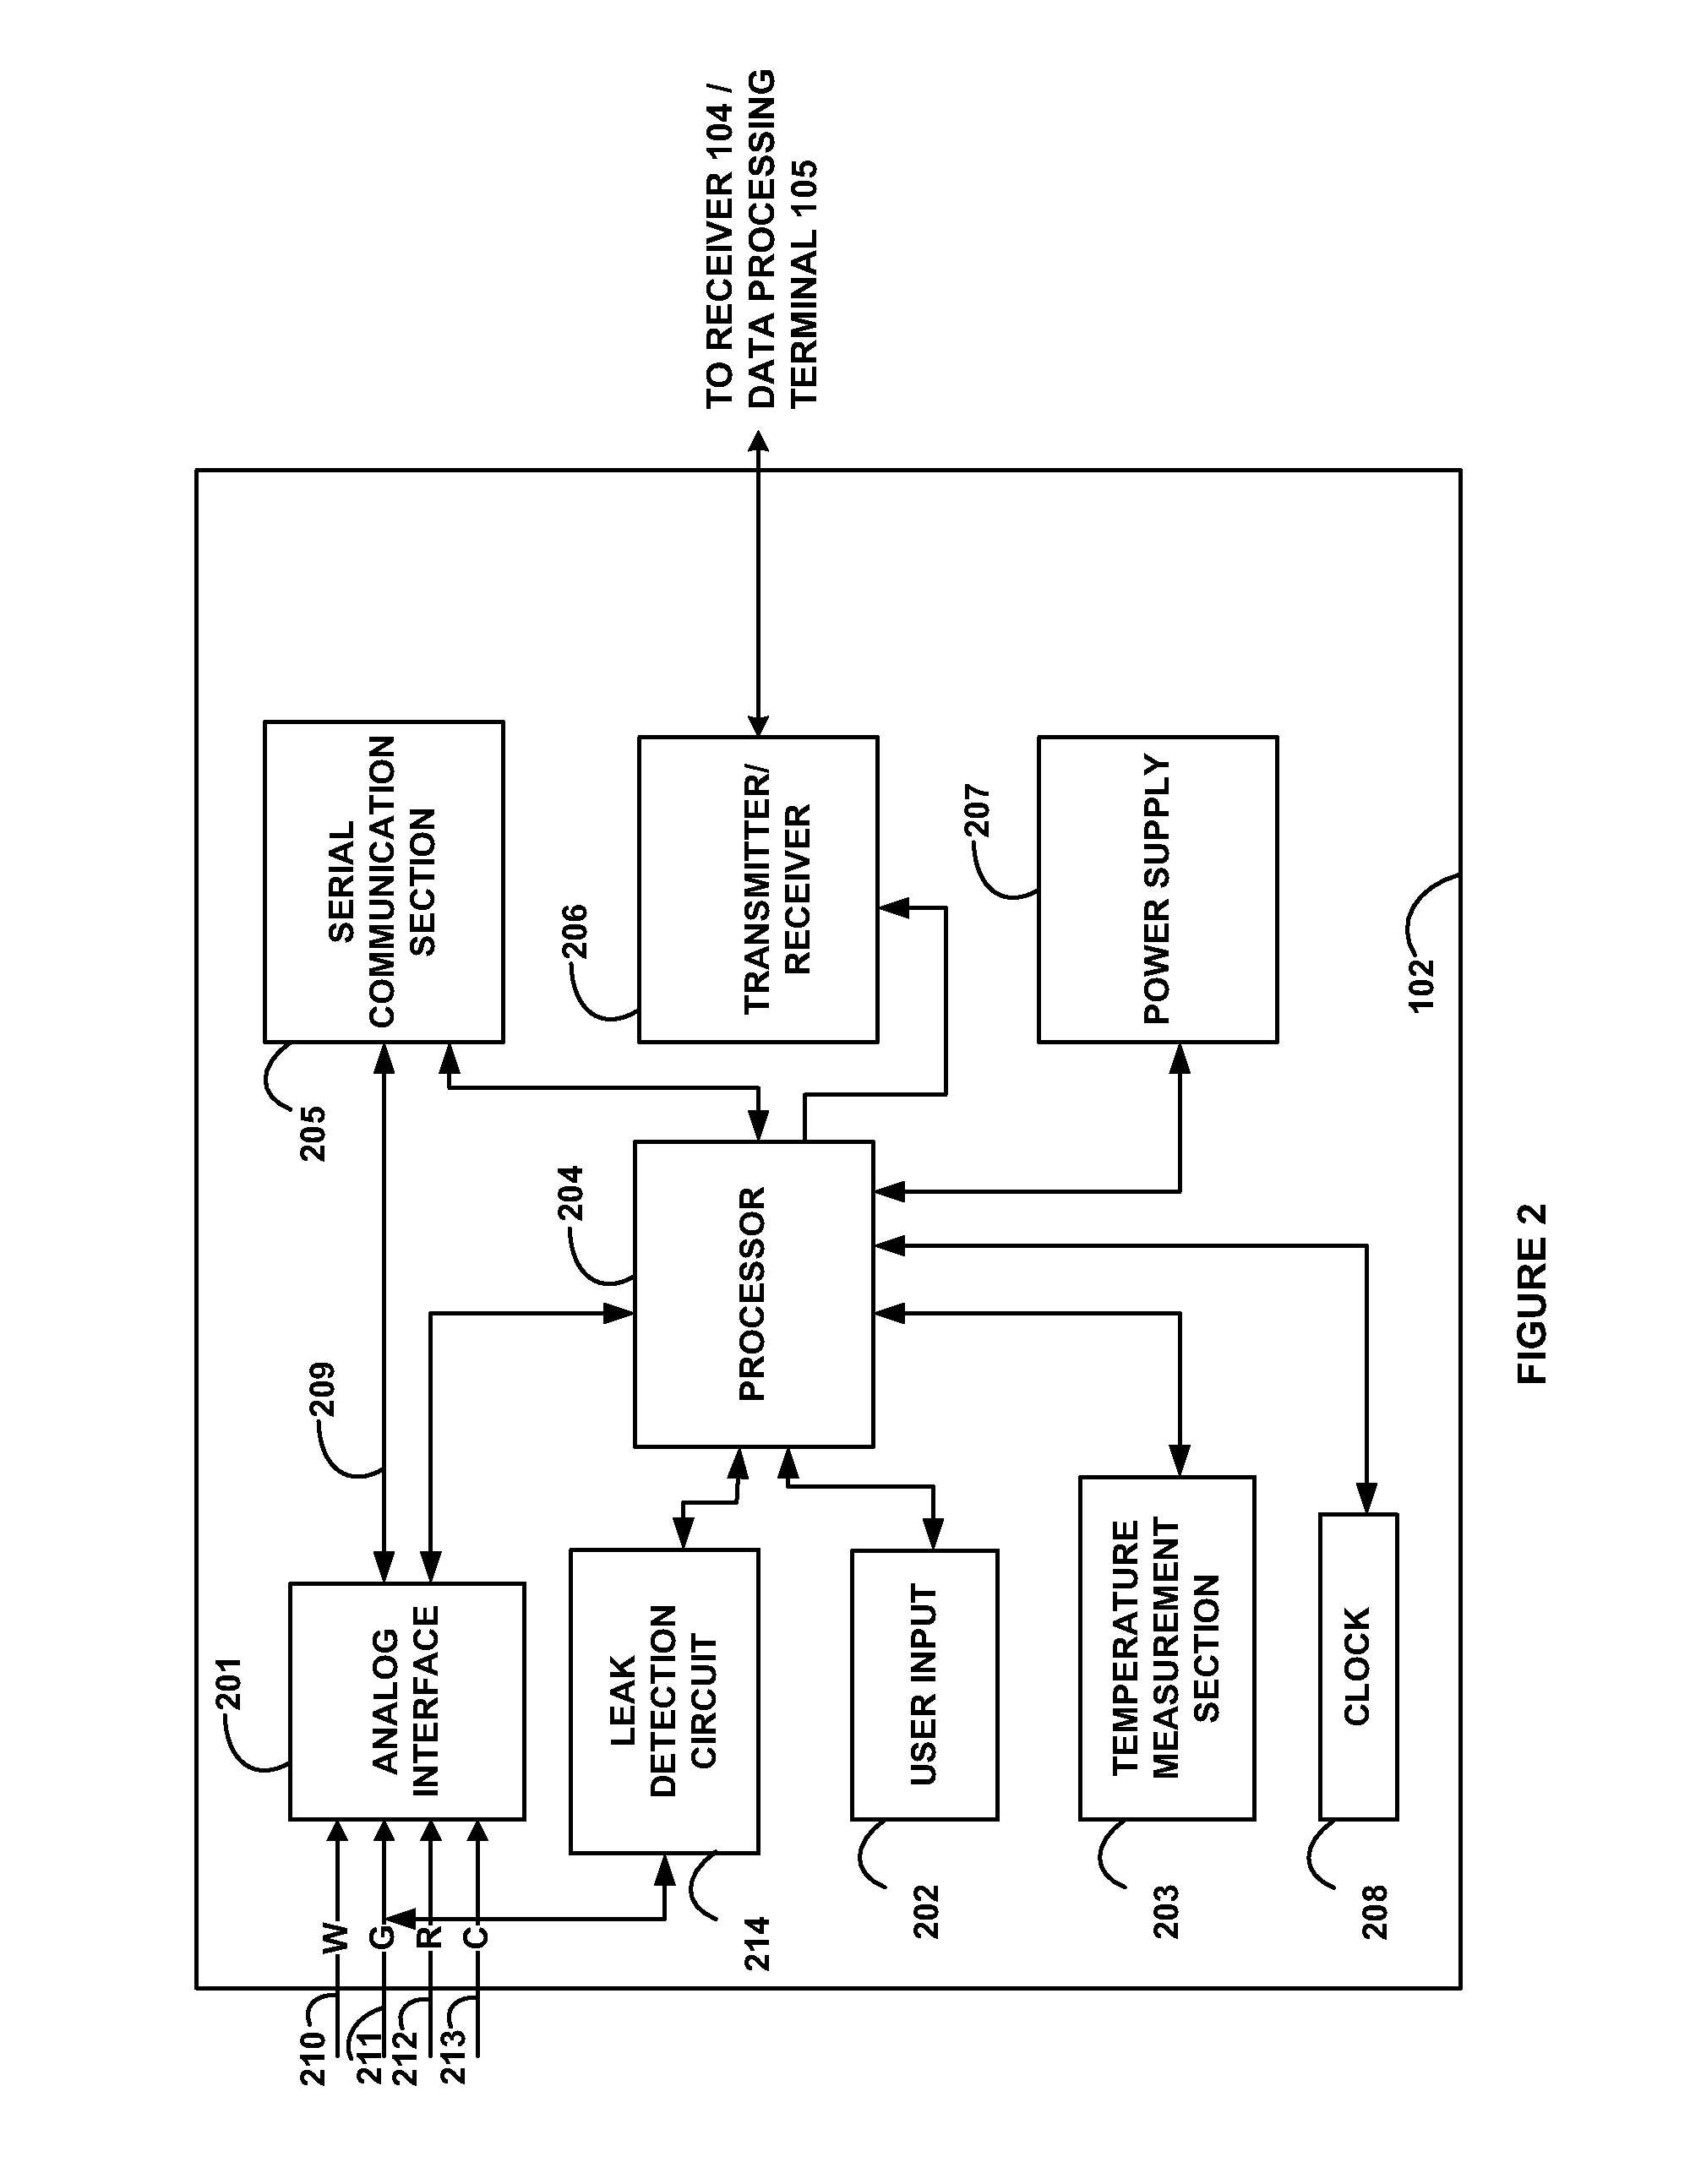 Method and system for providing basal profile modification in analyte monitoring and management systems